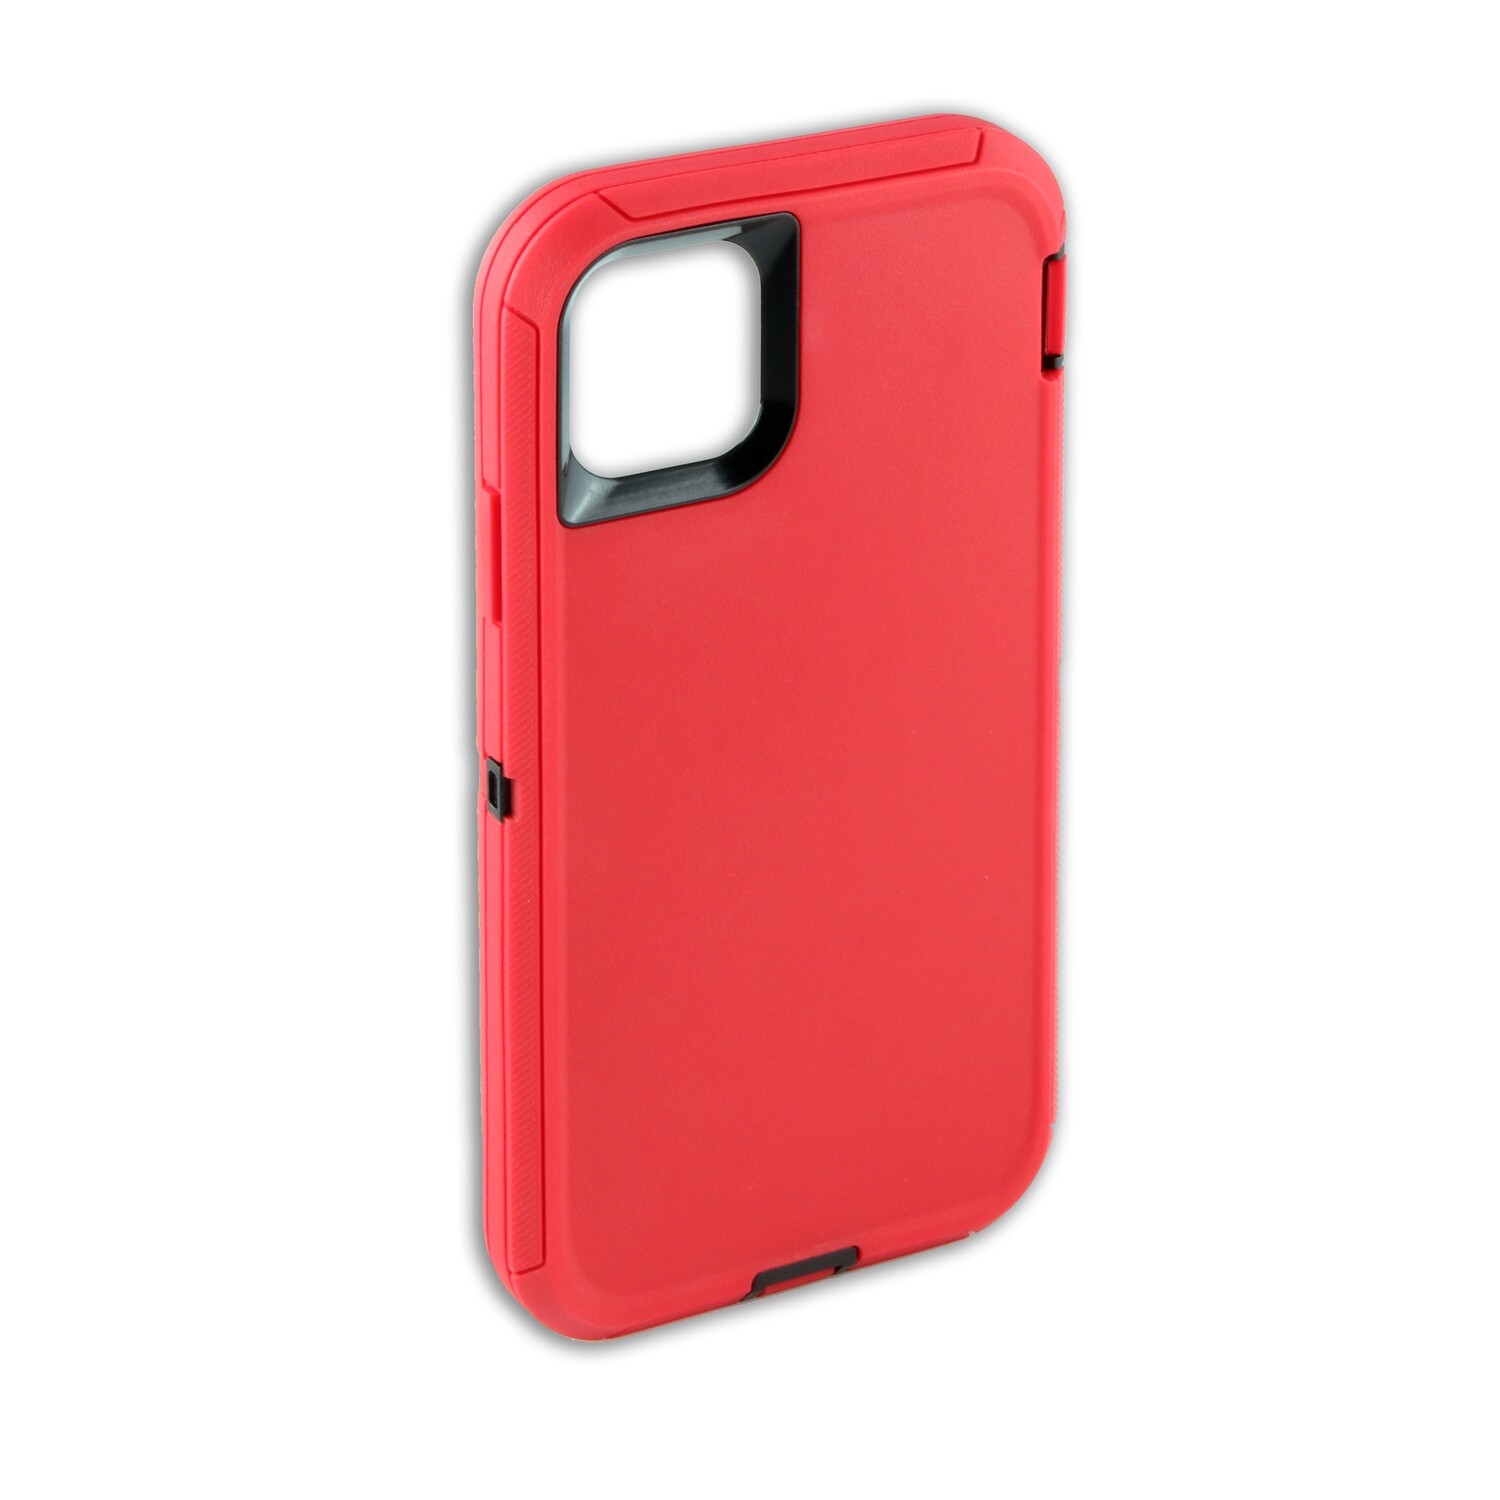 iPhone 12 Pro Max 6.7 Tough Guardian Robot ShockProof Case, Color: Red